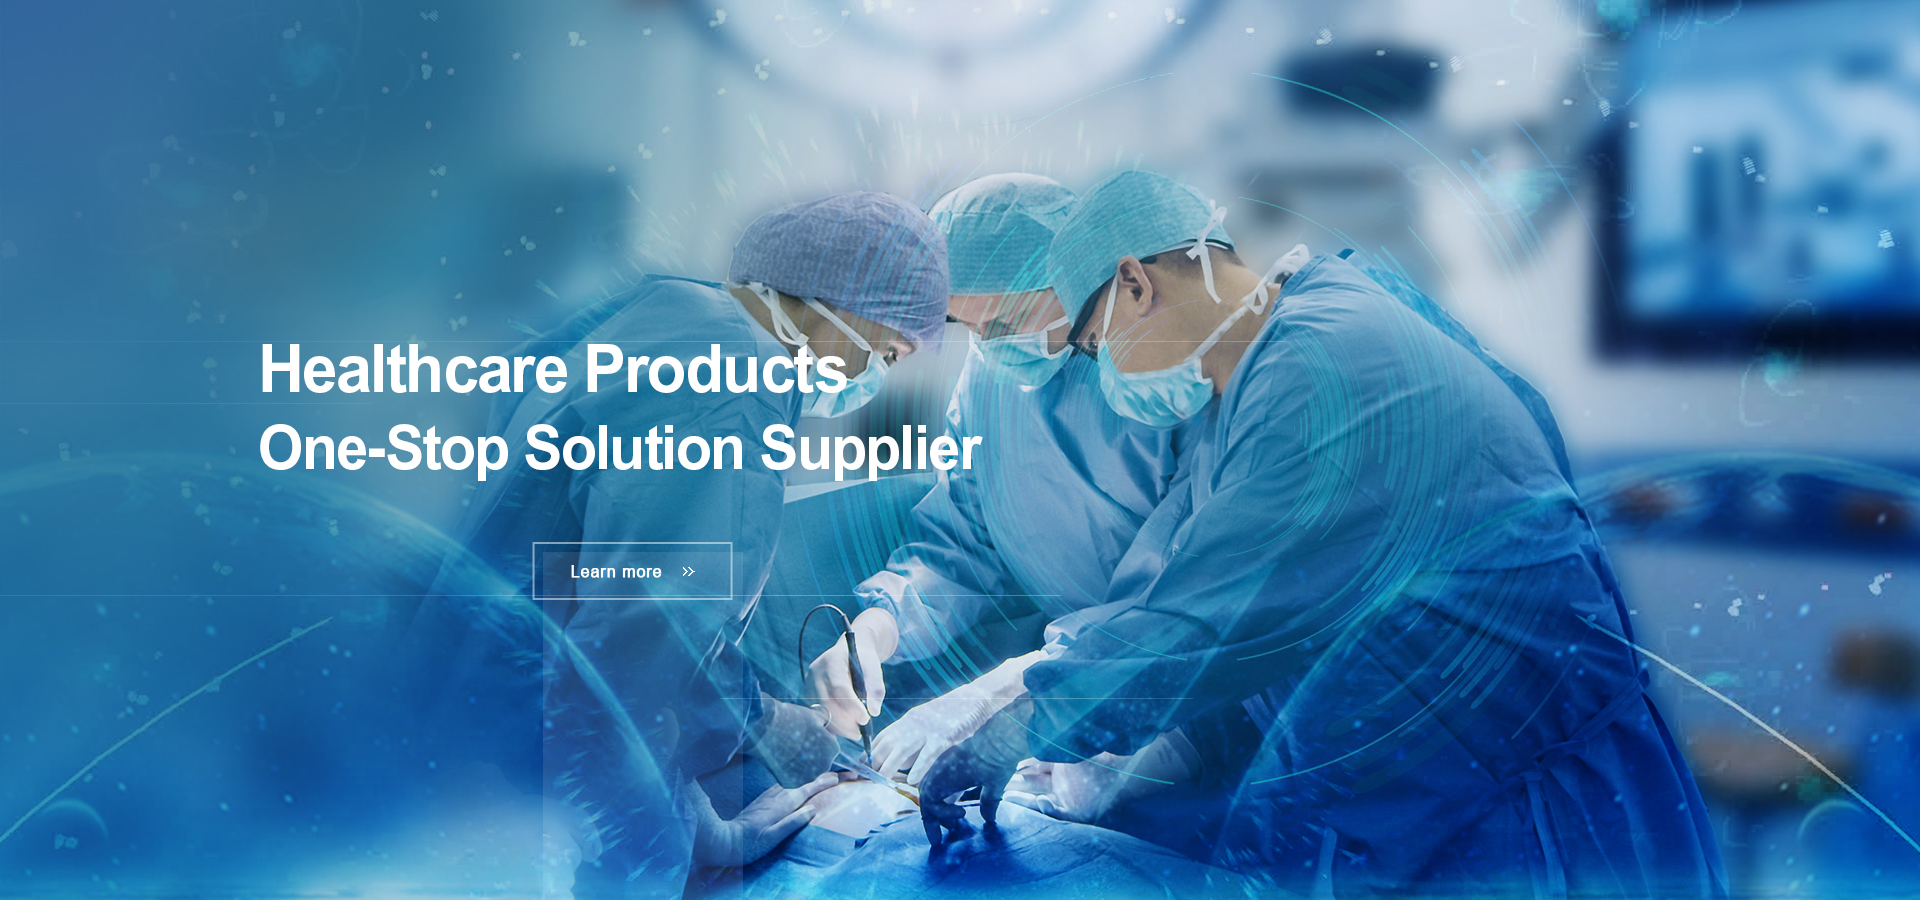 One-Stop Solutions